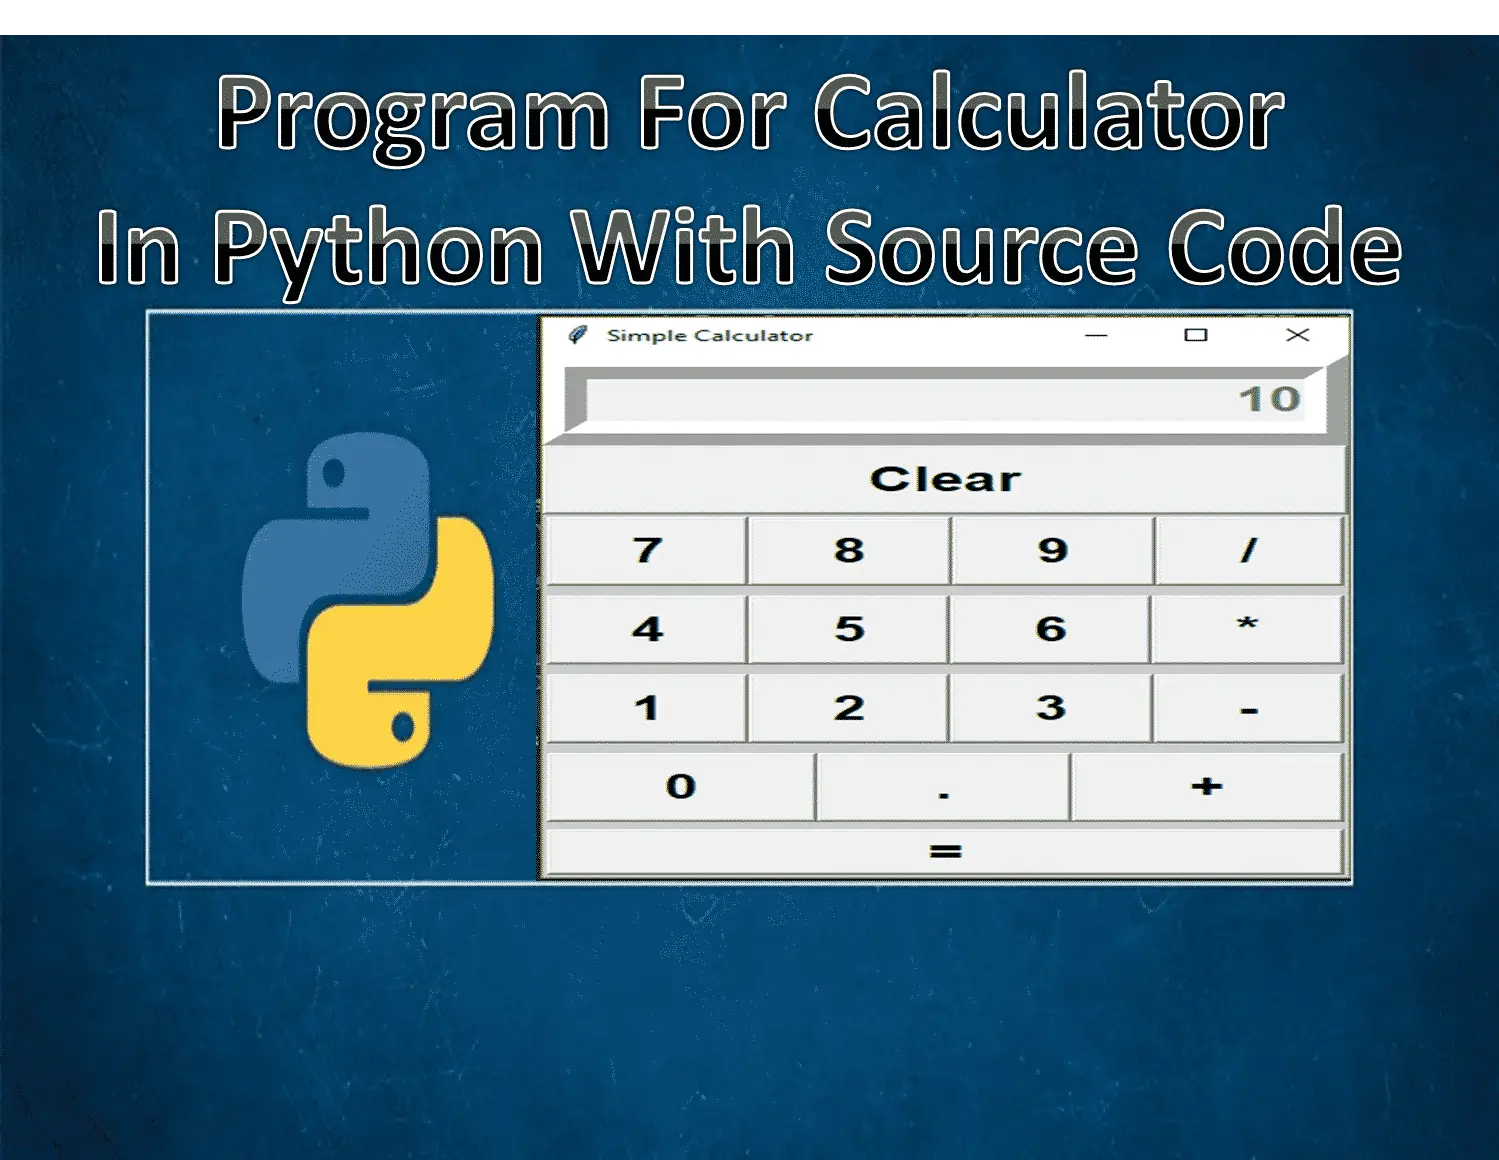 Program_For_Calculator_In_Python_With_Source_Code